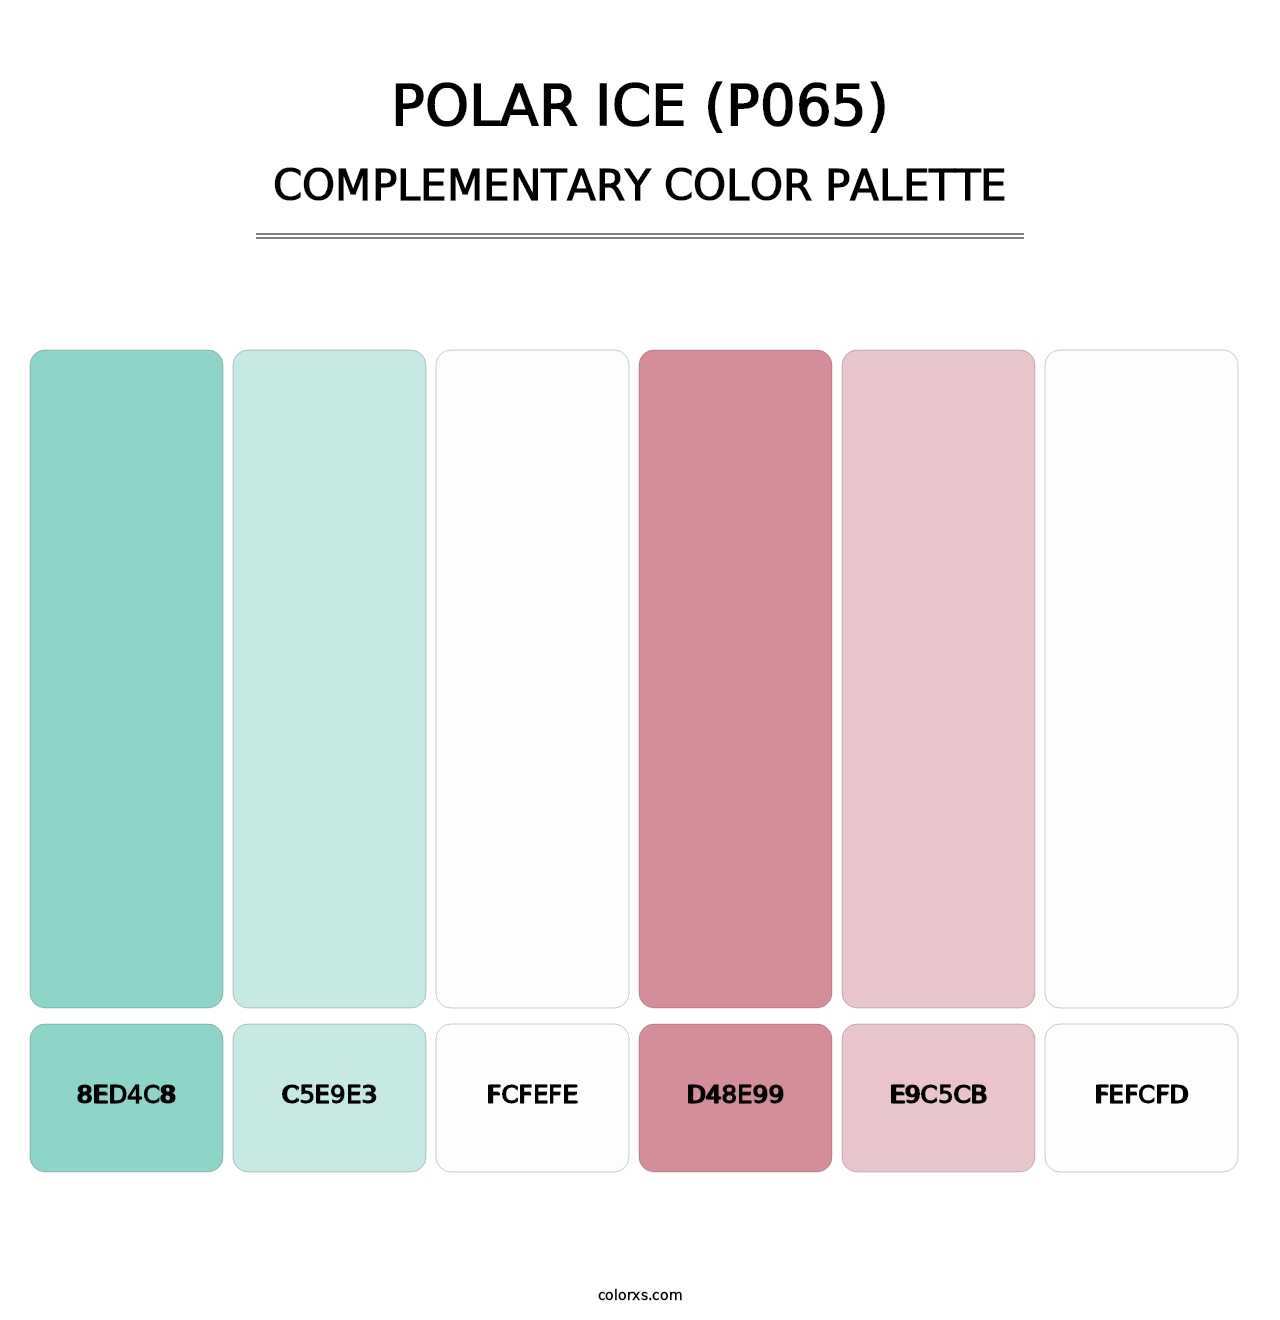 Polar Ice (P065) - Complementary Color Palette